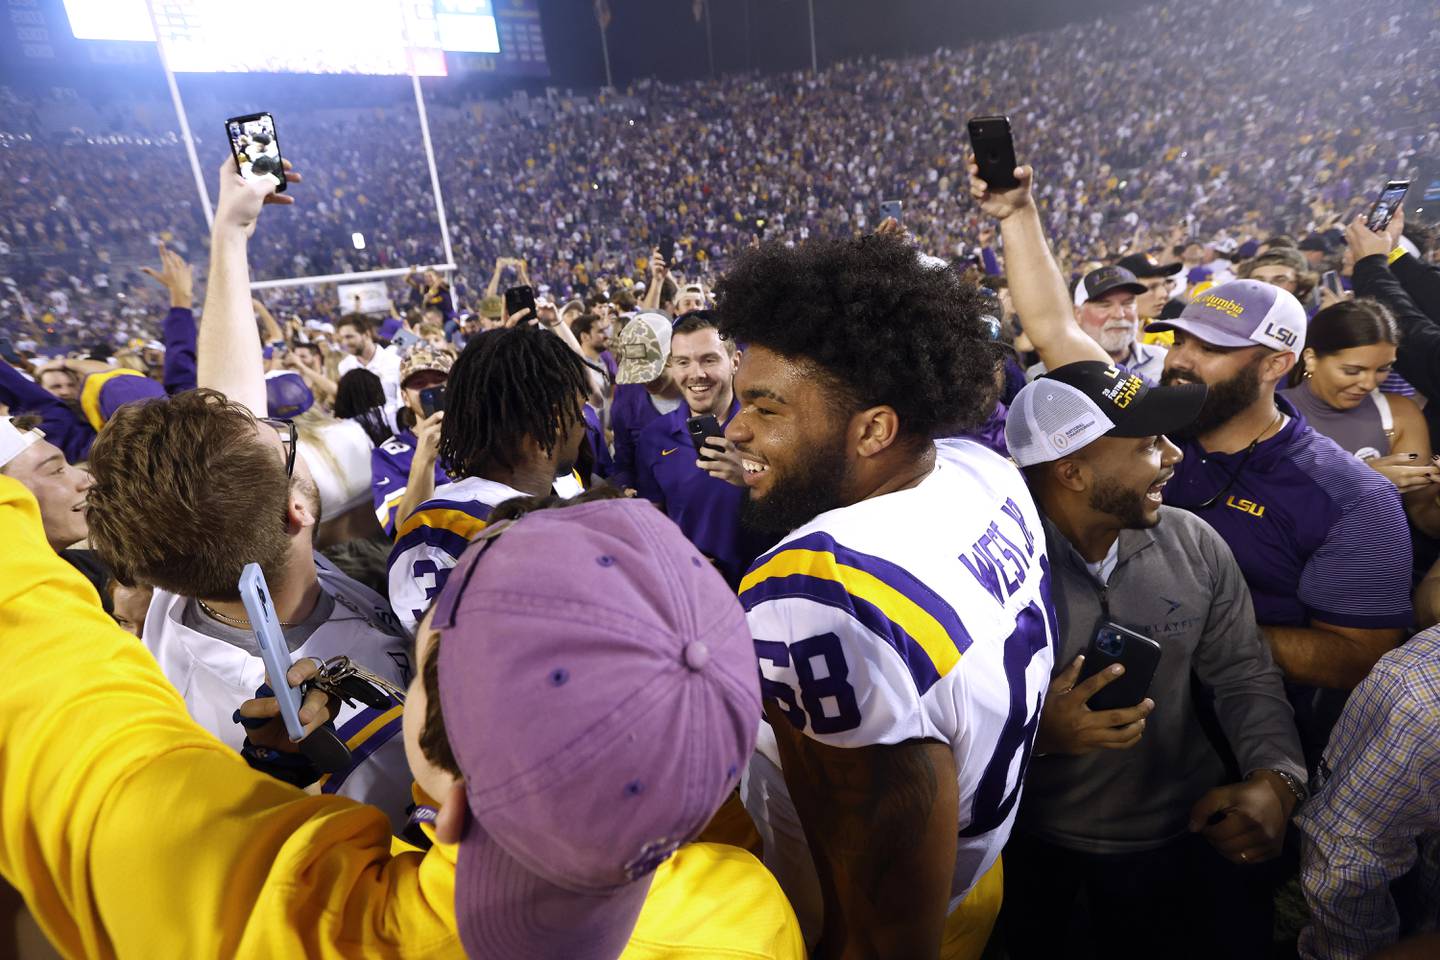 LSU offensive lineman Fitzgerald West Jr. celebrates with fans who gathered on the field after LSU defeated Alabama in overtime on Nov. 5, 2022.